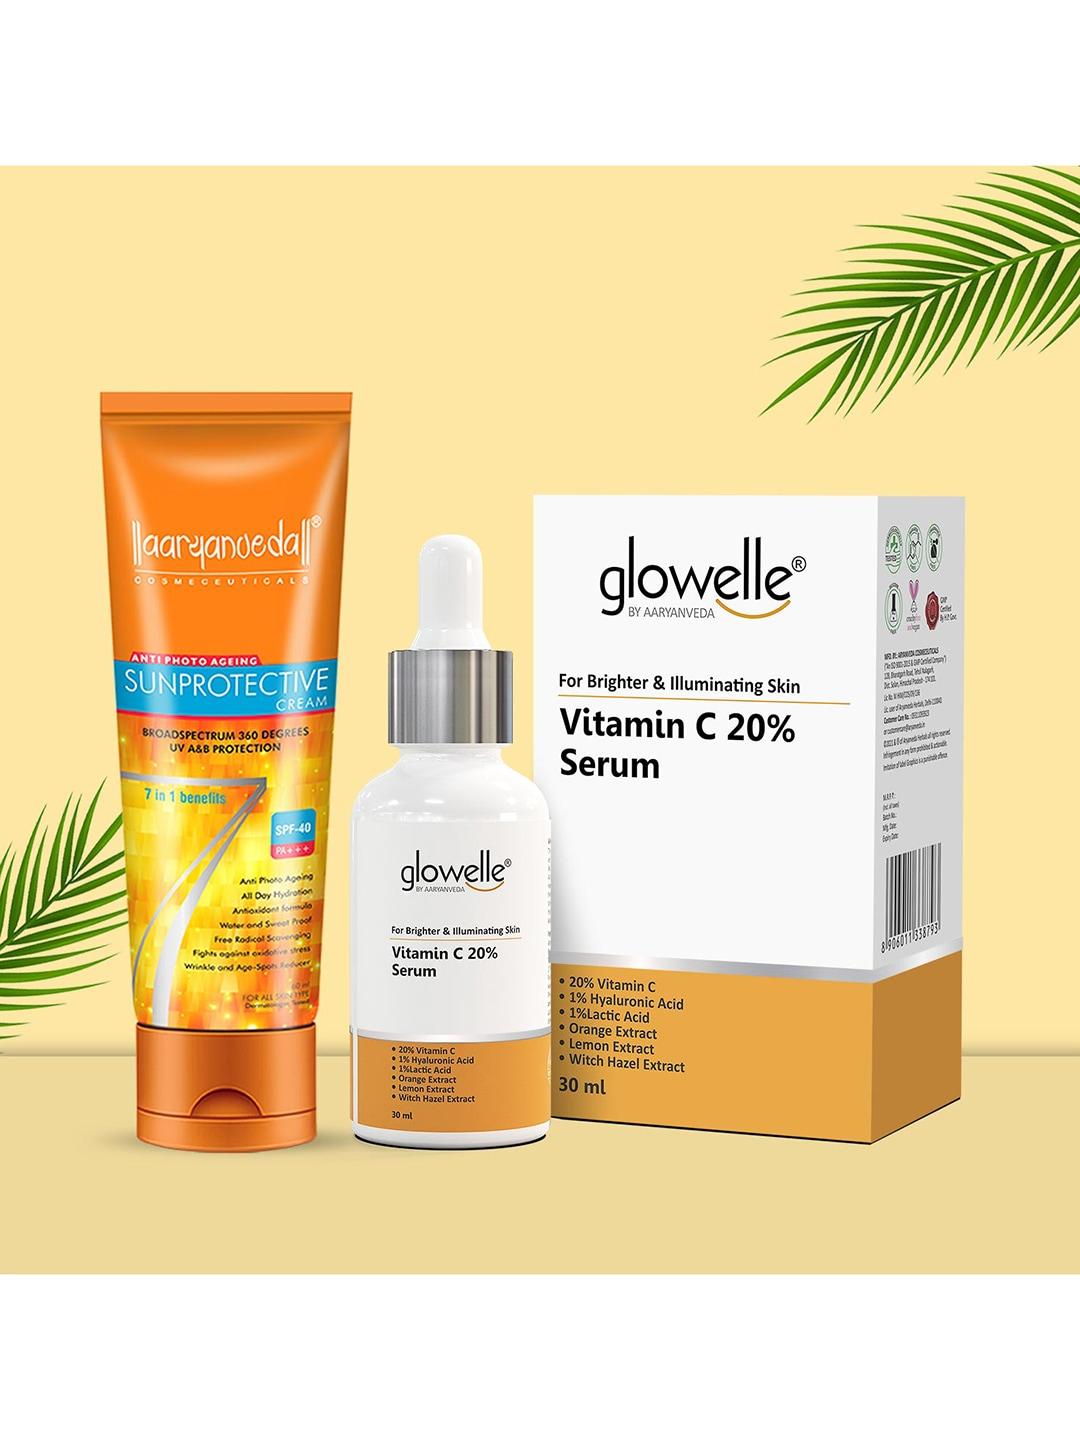 Aryanveda Sunscreen Spf 40 Pa+++ With Glowelle Vitamin C Face Serum For Illuminated Skin-90G Each